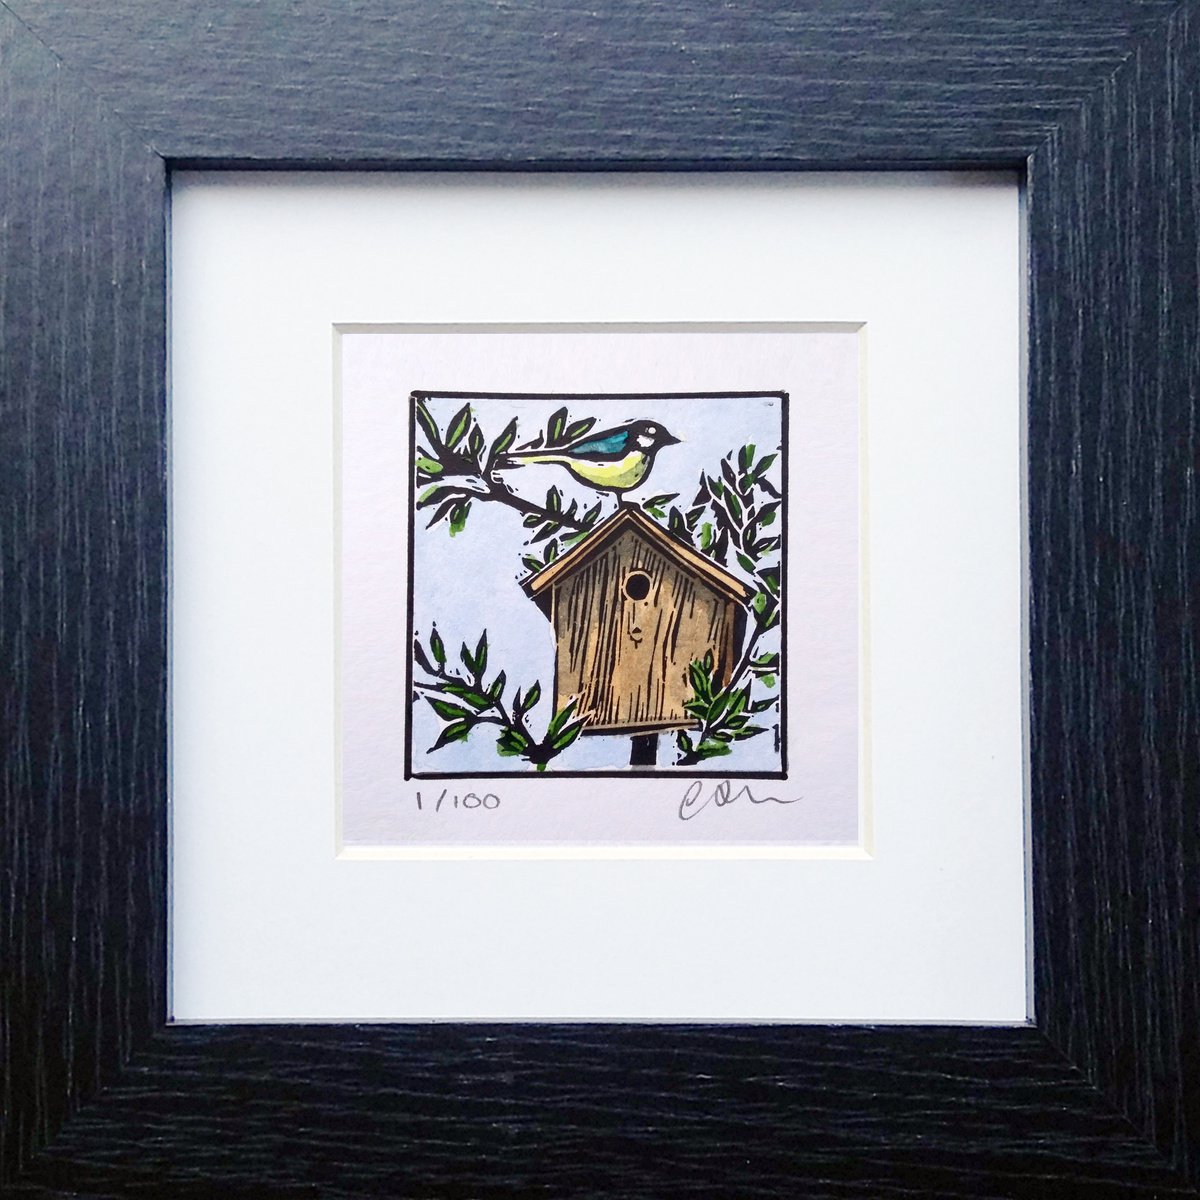 Home sweet home - miniature hand painted linocut print - Framed and ready to hang by Carolynne Coulson